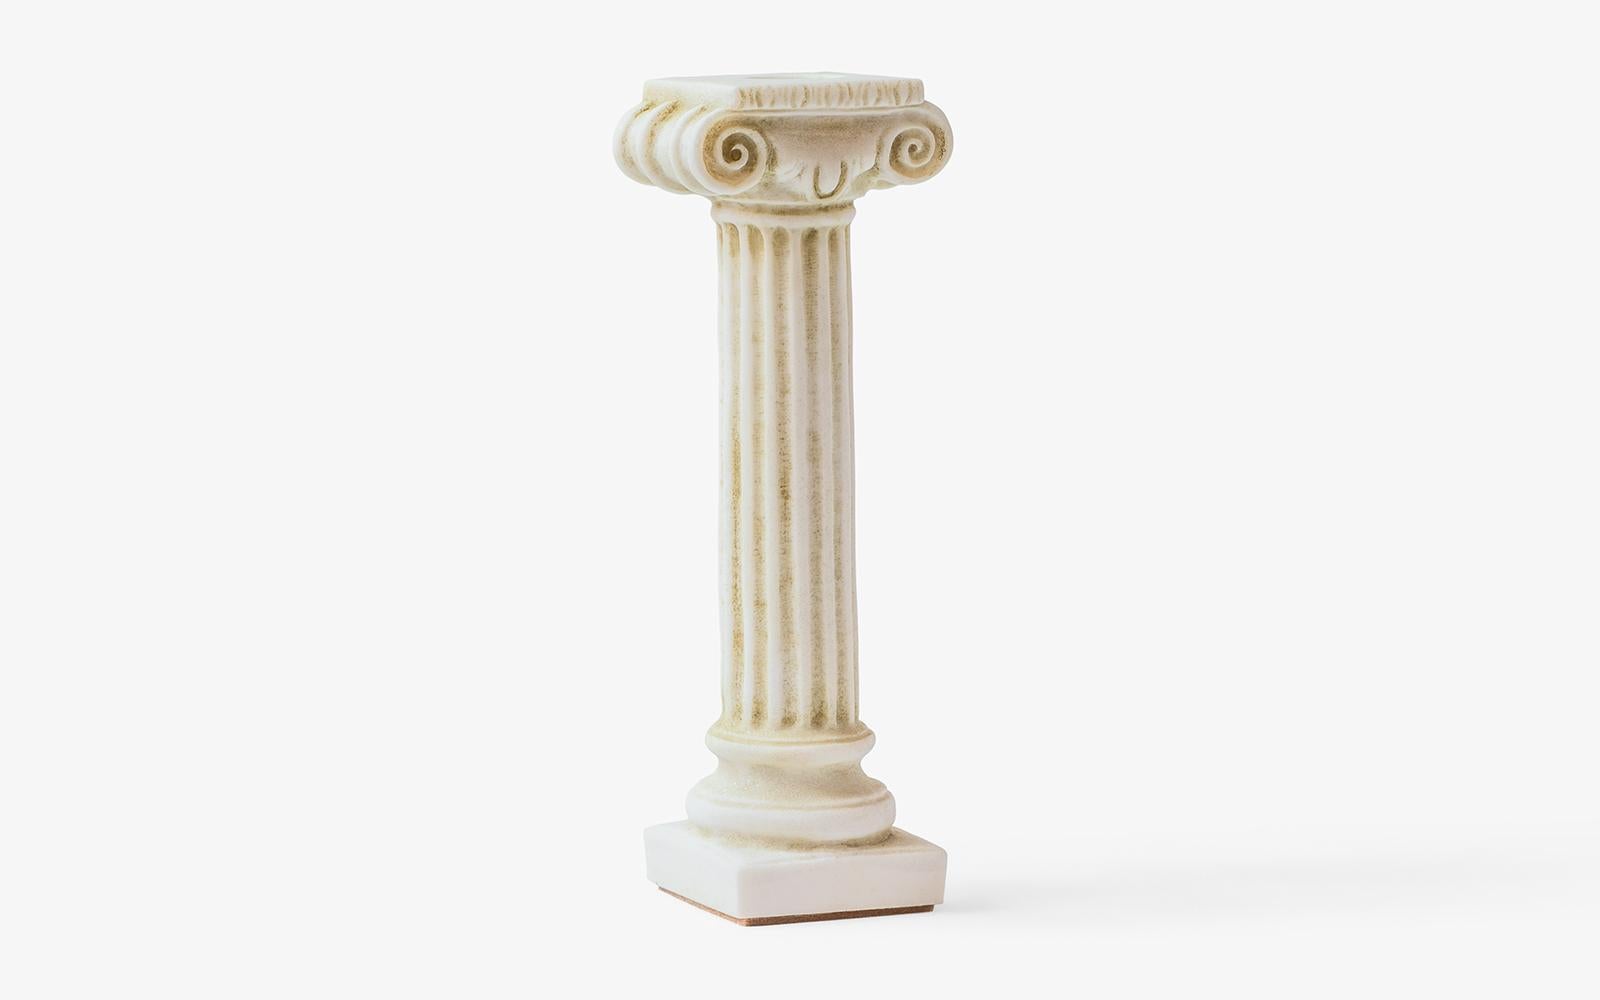 Weight: 700 gr

Ionic regular columns, born on the western and southern coasts of Anatolia, have a thin, long and elegant form.

This Ionic column candlestick is a unique and elegant decorative item that is made from compressed marble powder. It is